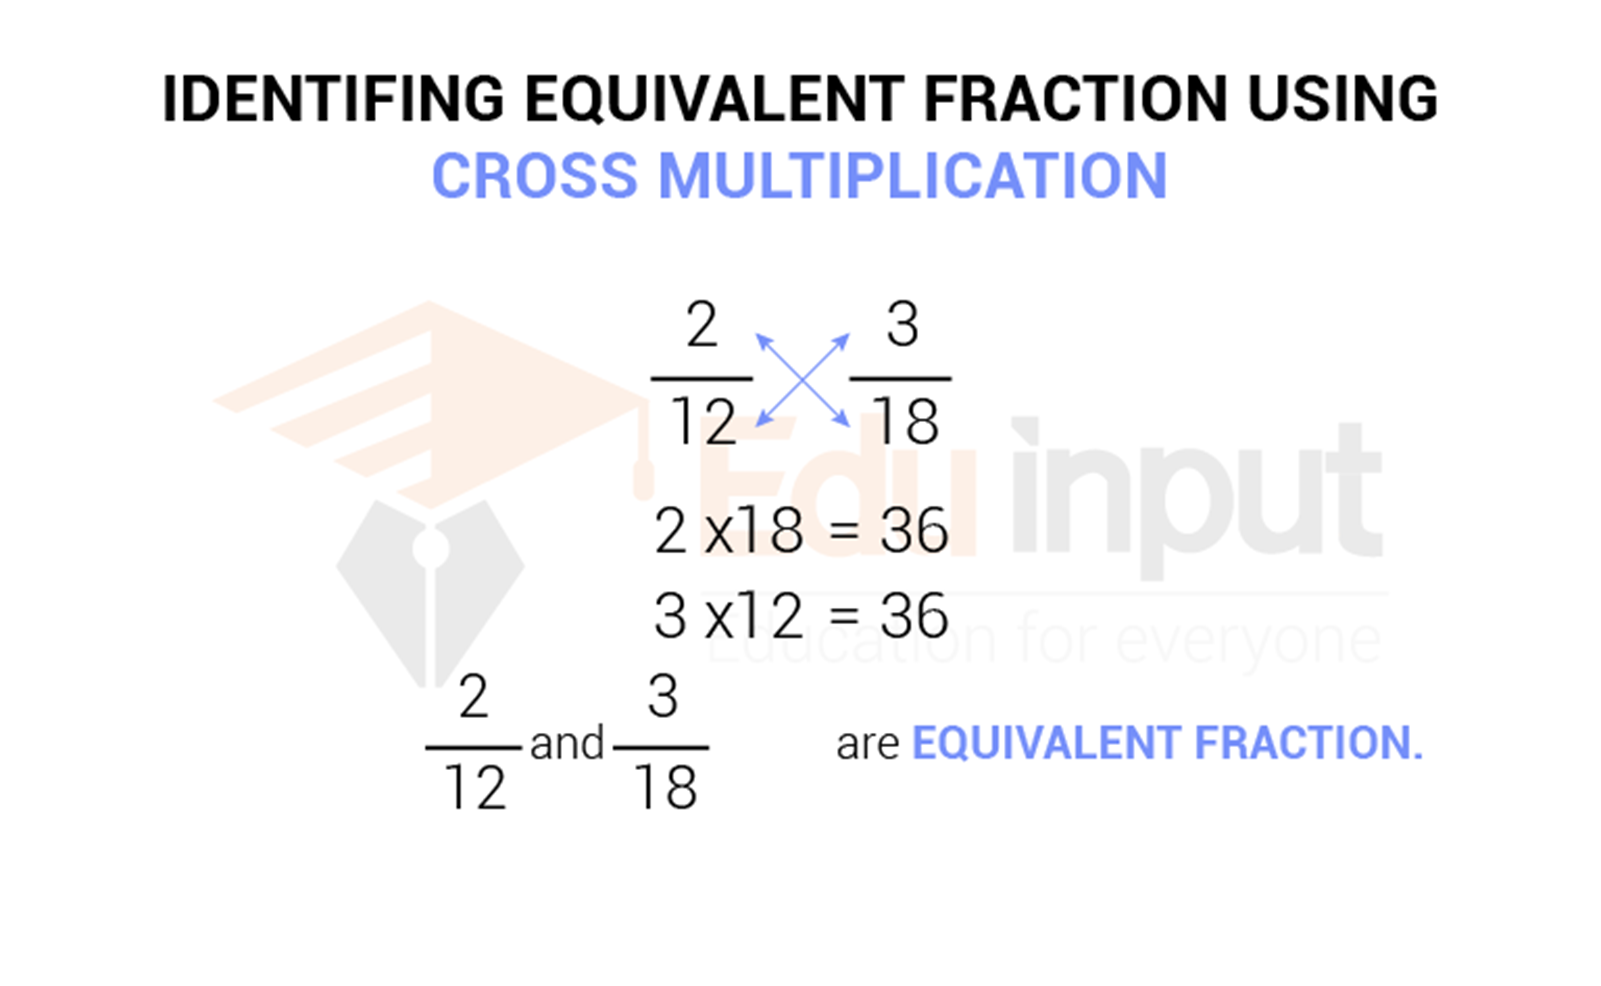 How to Find Equivalent Fractions?